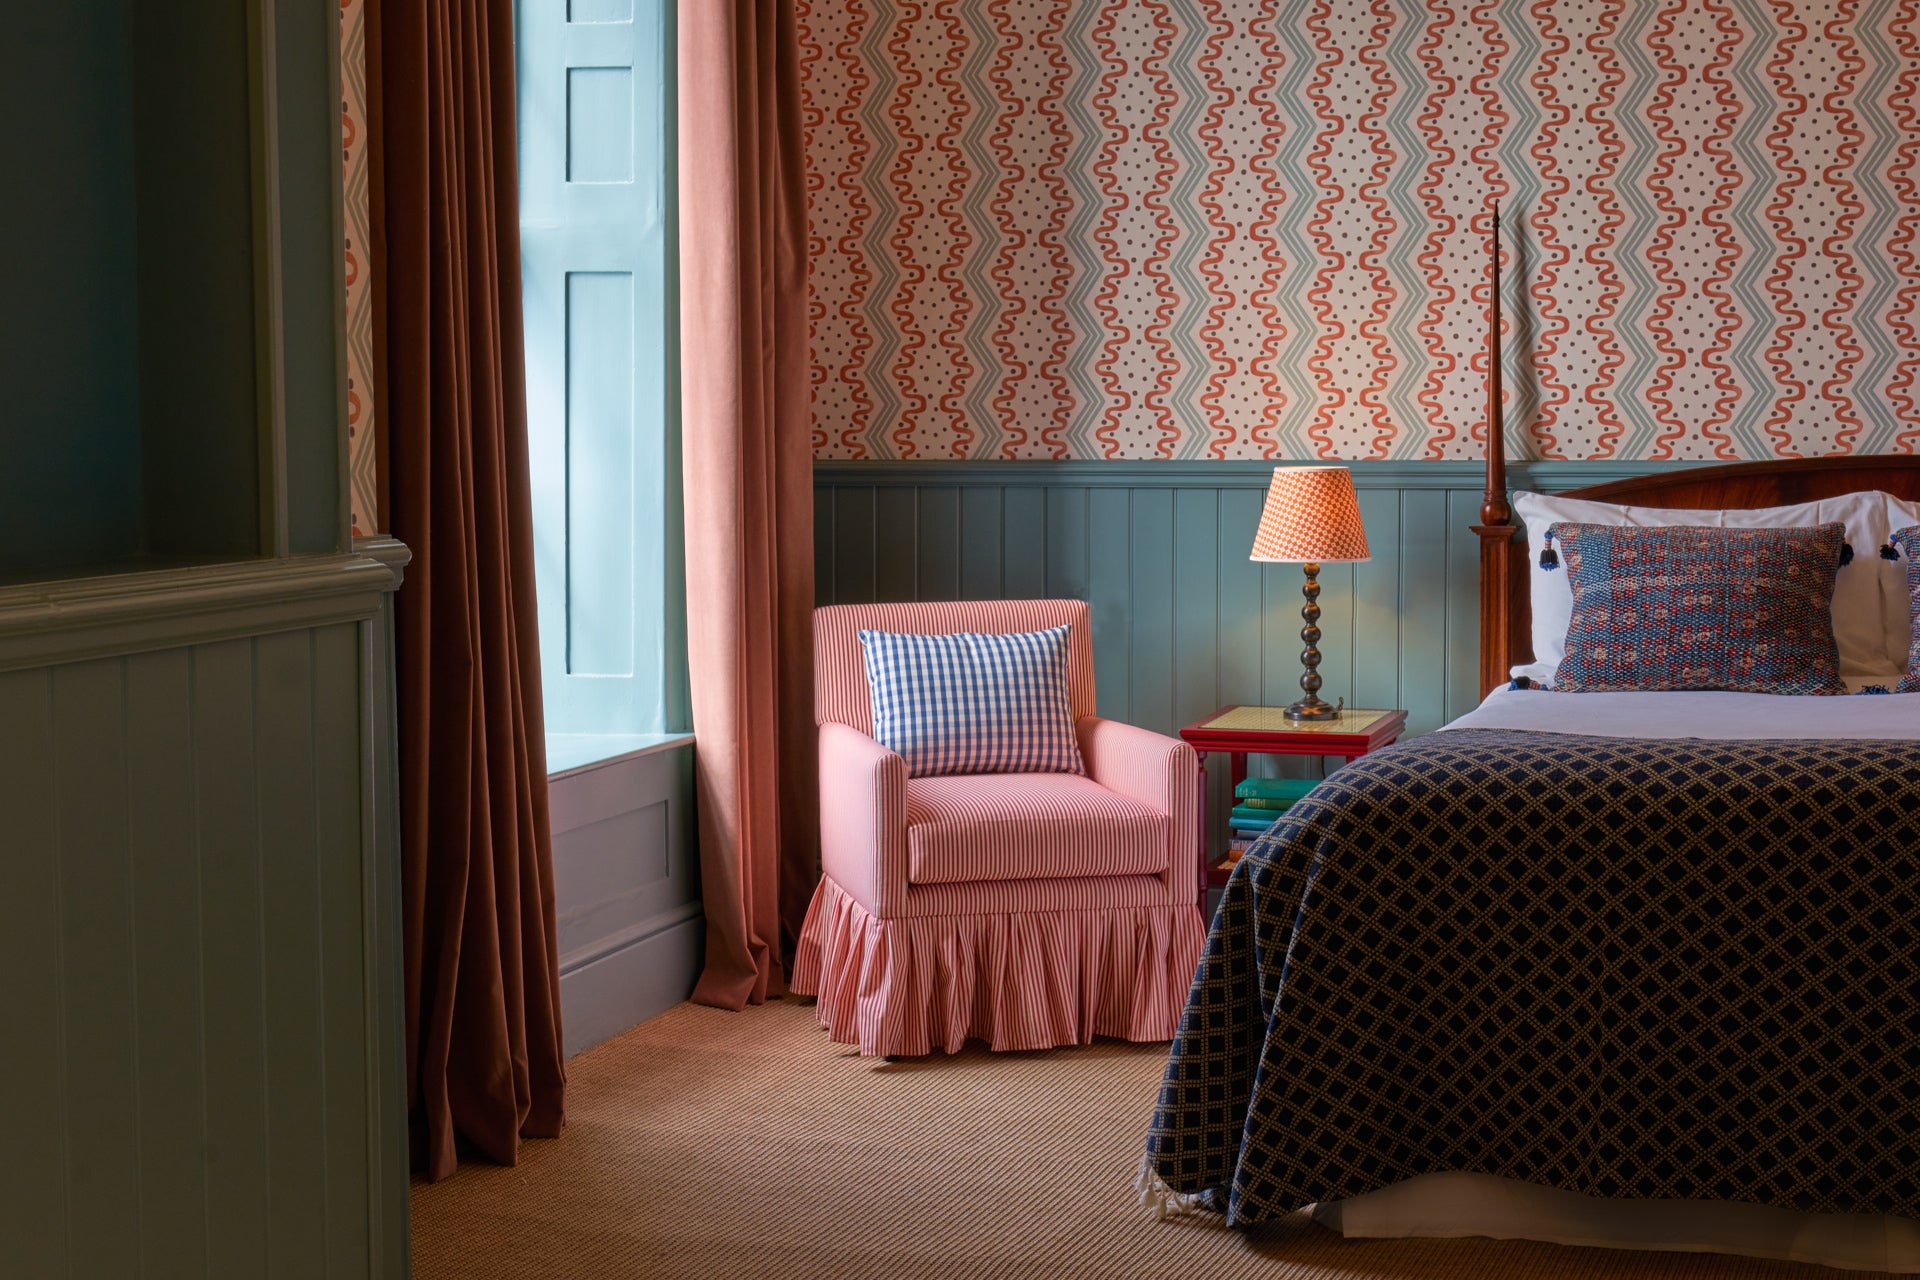 The Mitre’s stylish bedrooms look out over Hampton Court Palace